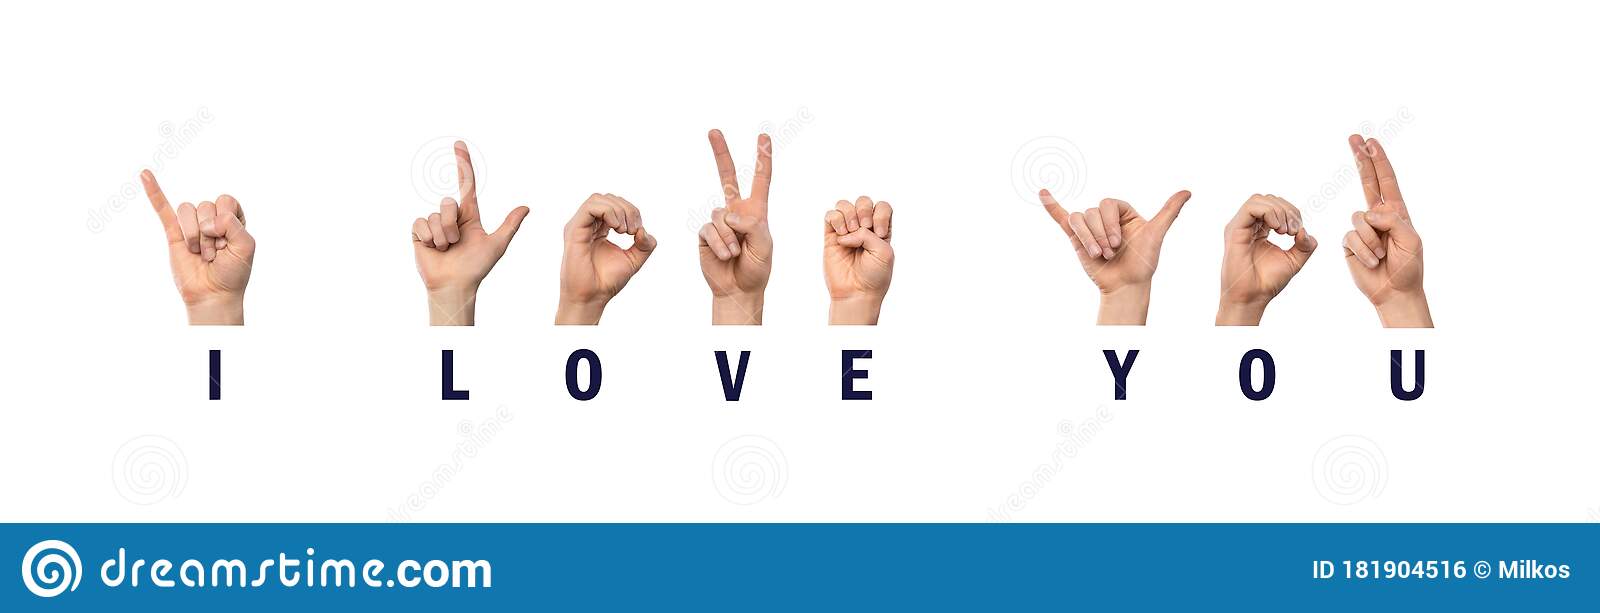 70ä»¥ä¸ i love you in sign language letters 602261